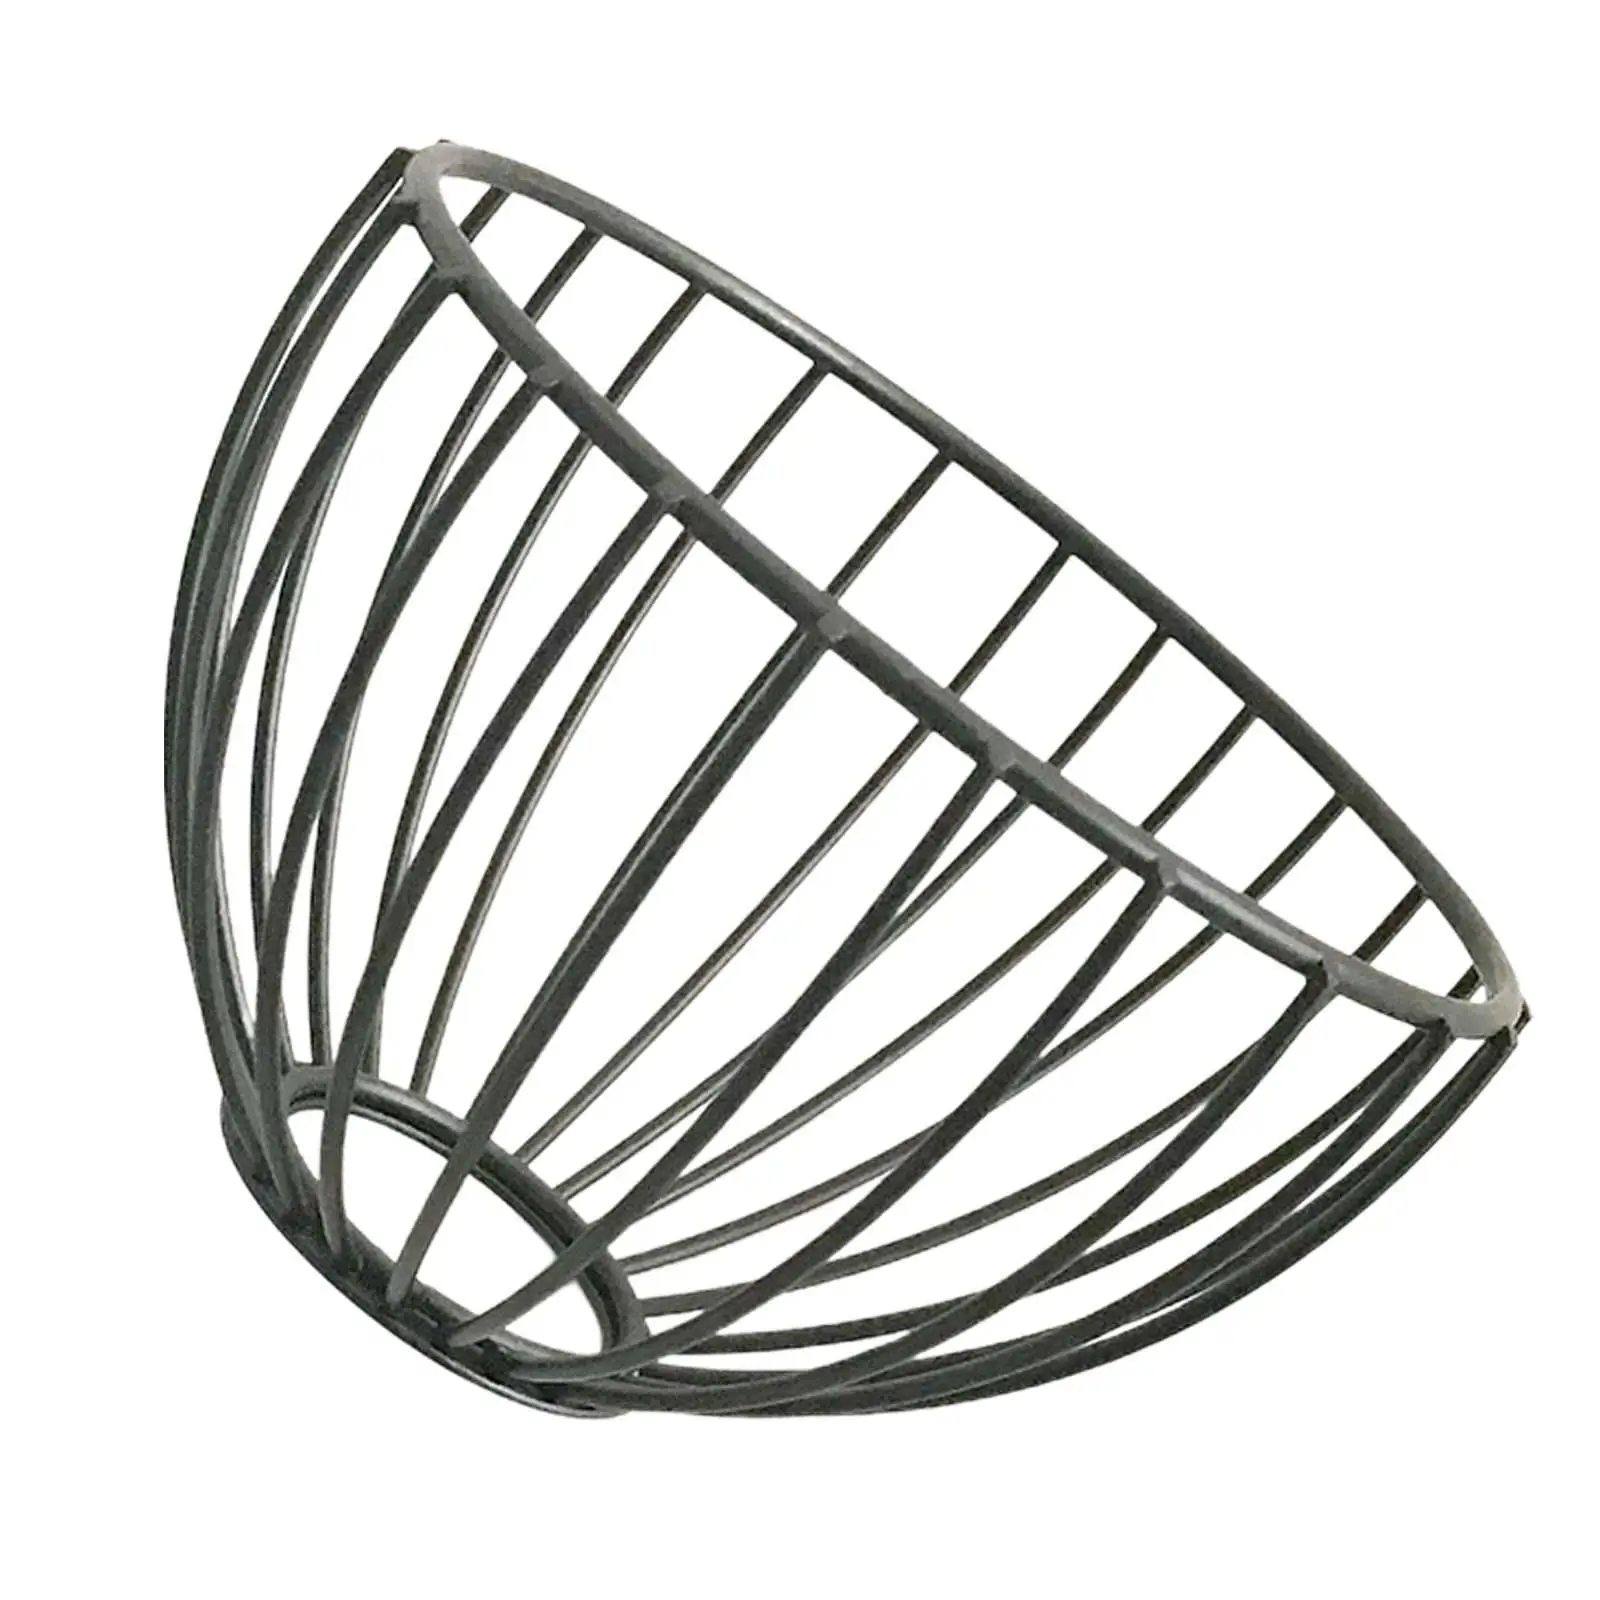 Wrought Iron Lampshade Light Cover Stable for Household Teahouse Living Room